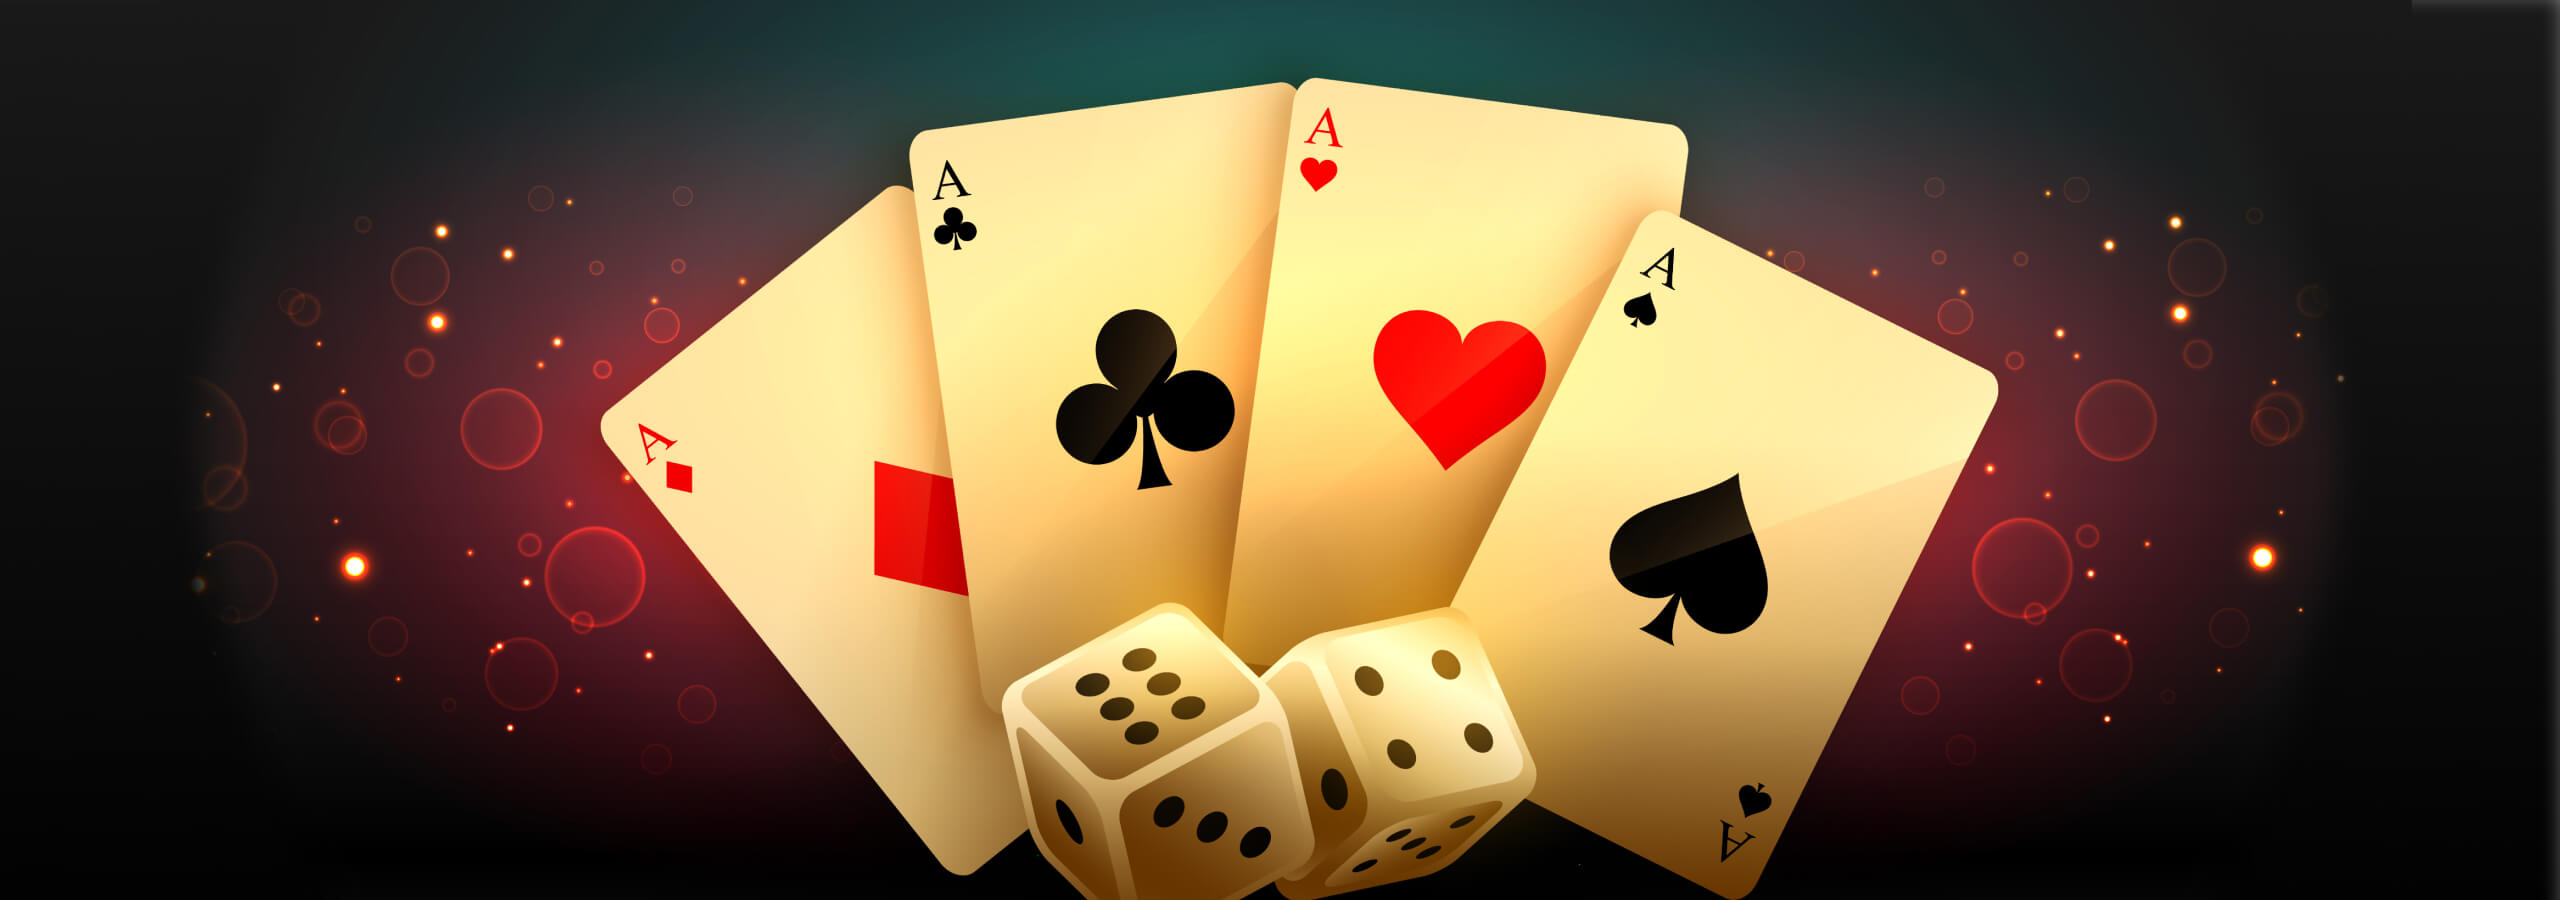 A few words about Free Online Casino Games